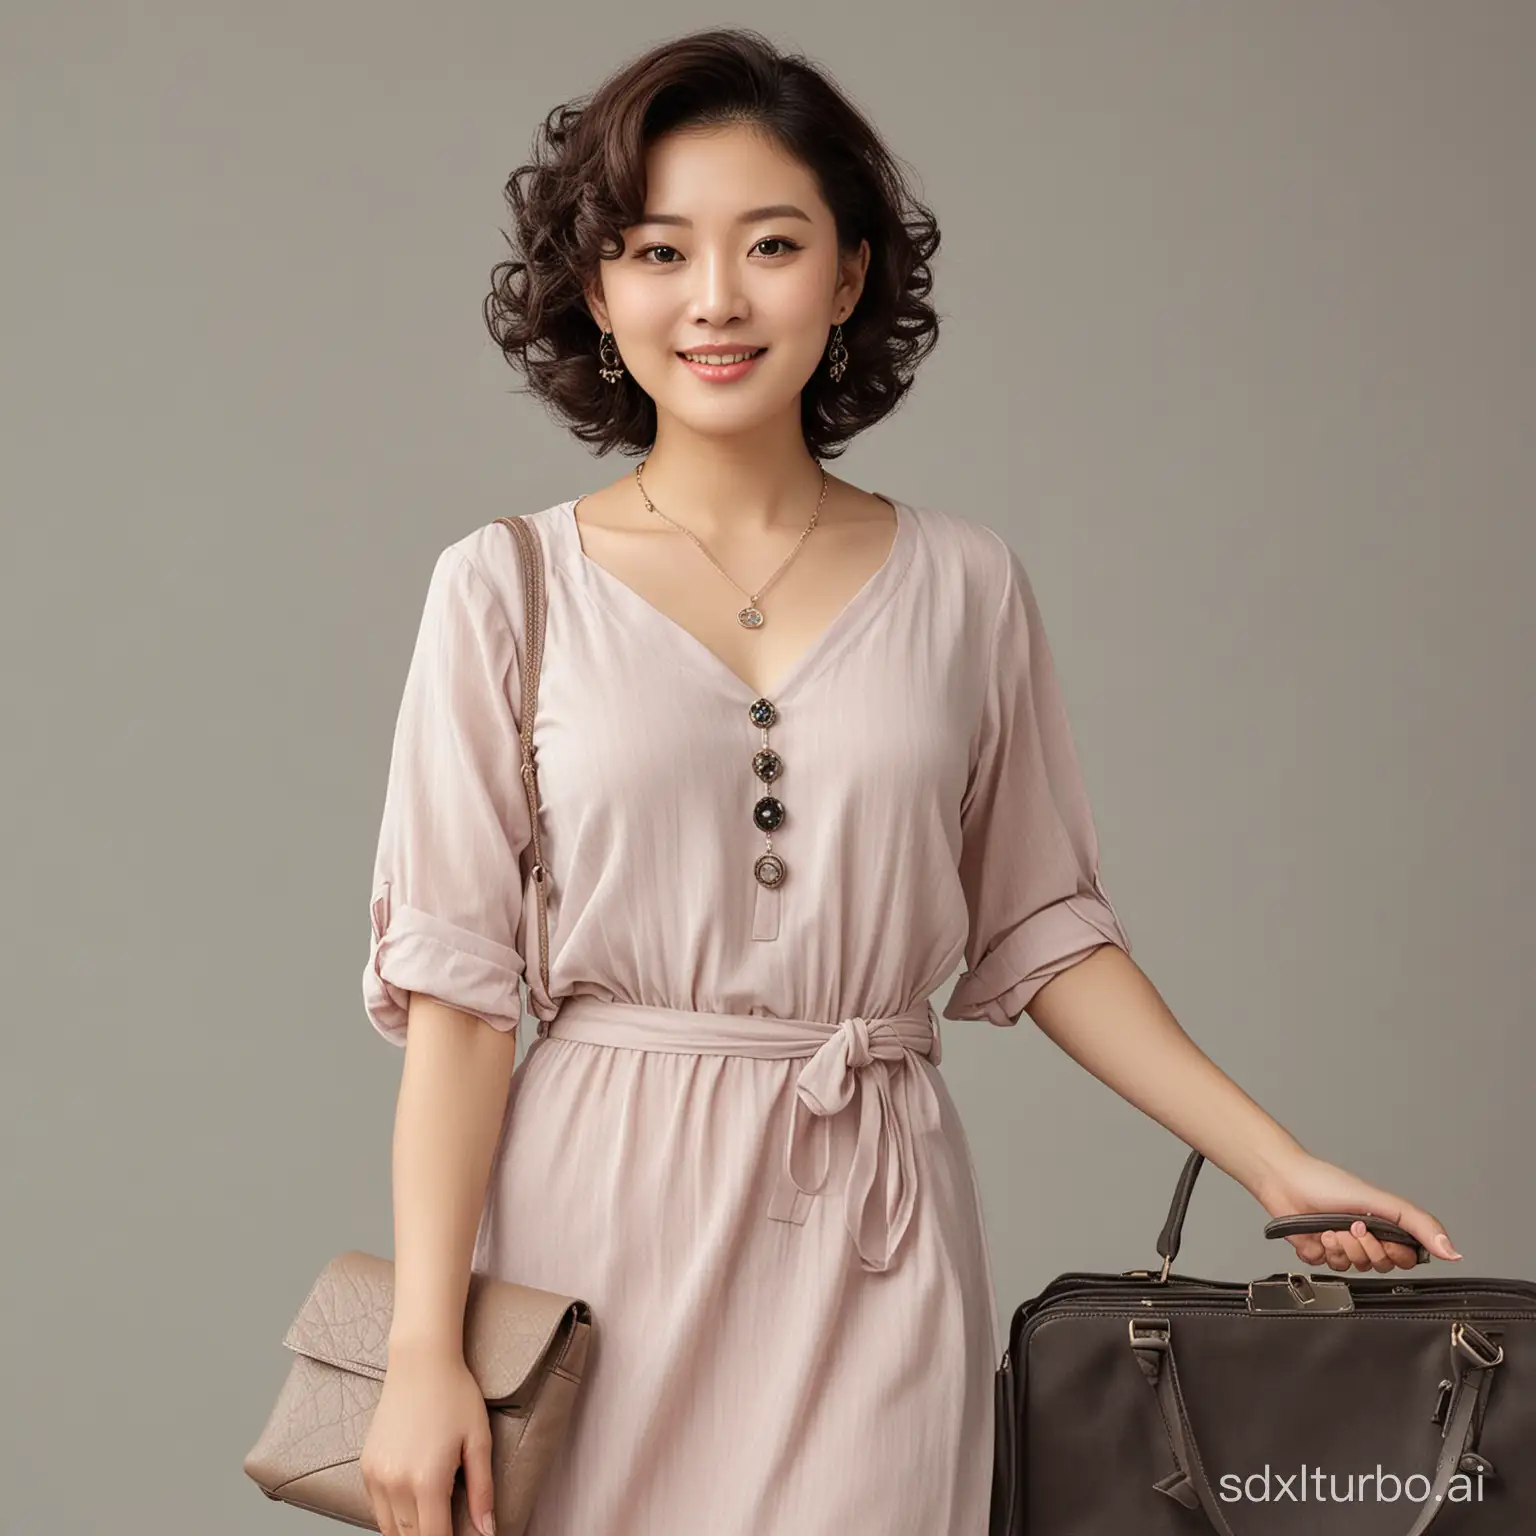 Elegant-Chinese-Woman-in-Casual-Attire-with-Curly-Hair-and-Accessories